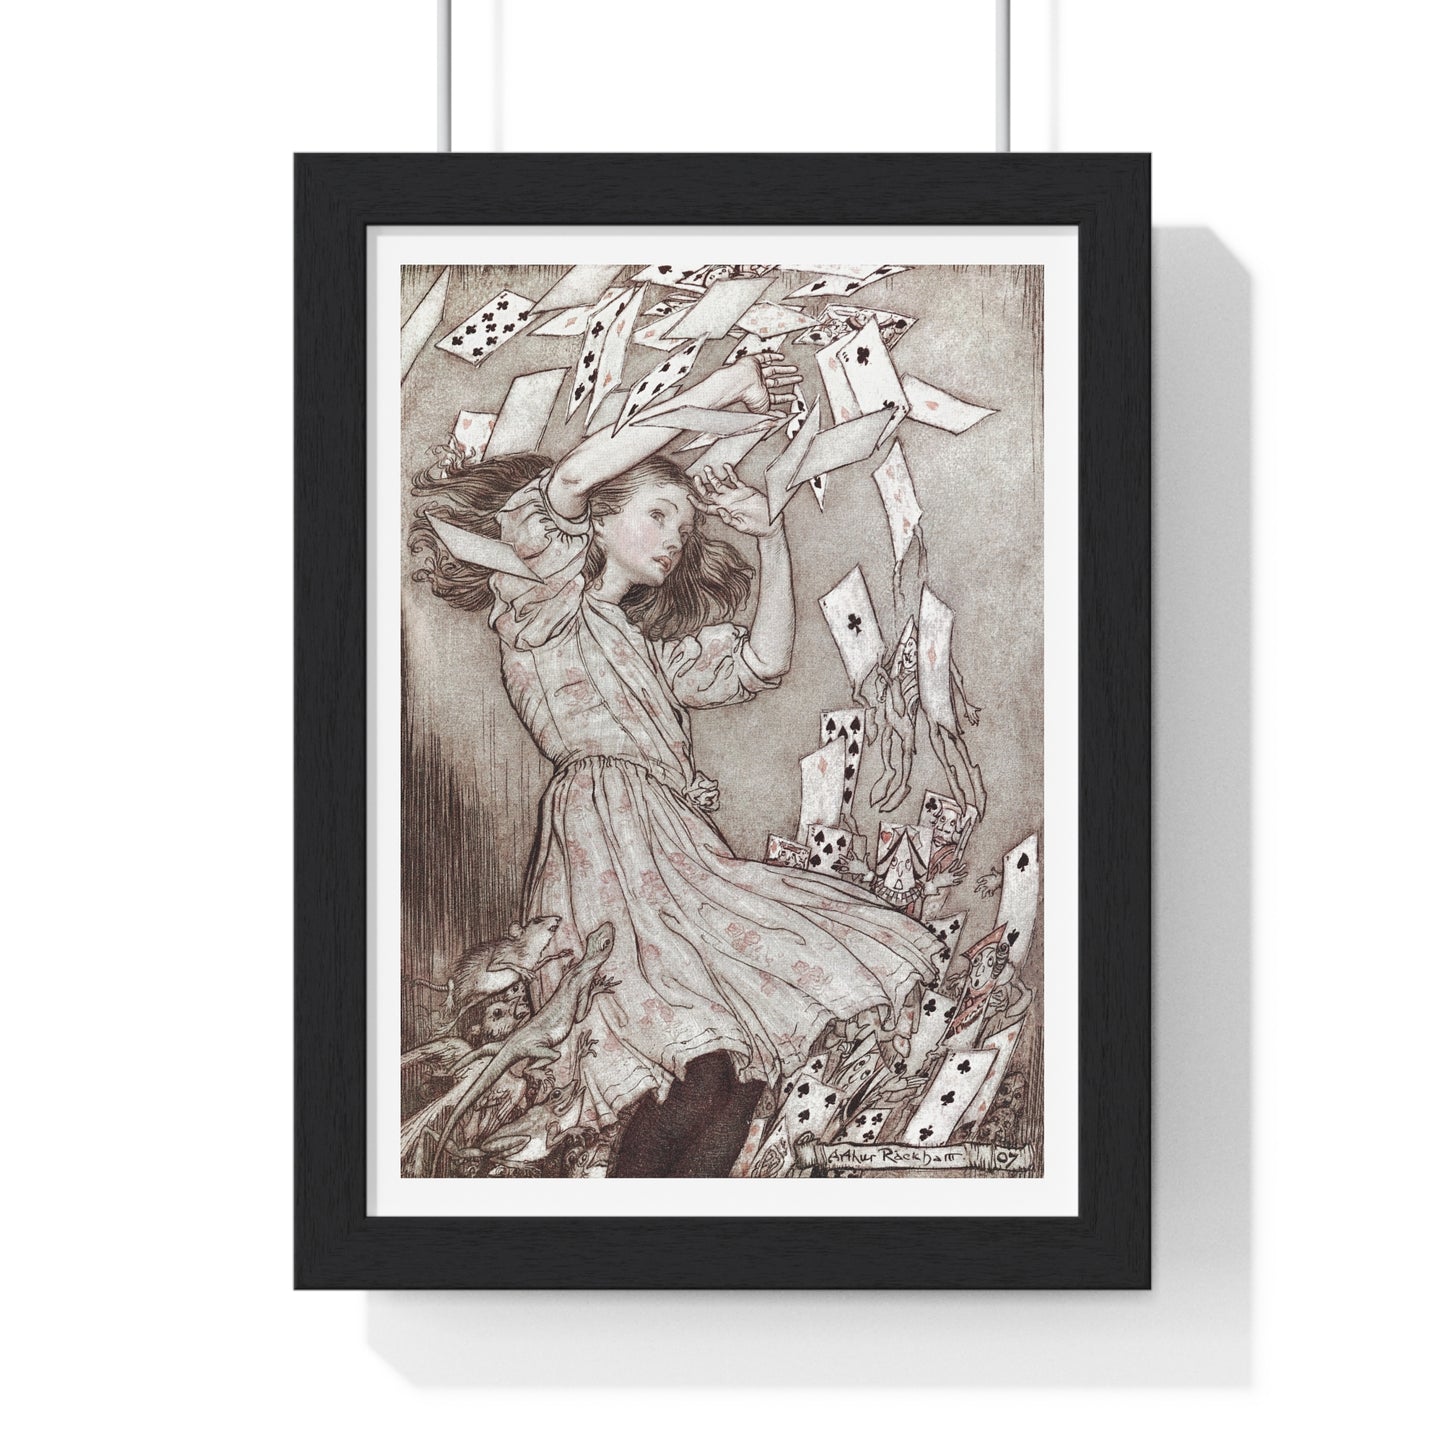 Alice's Adventures in Wonderland (1907) by Lewis Carroll, from the Original, Wooden Framed Print